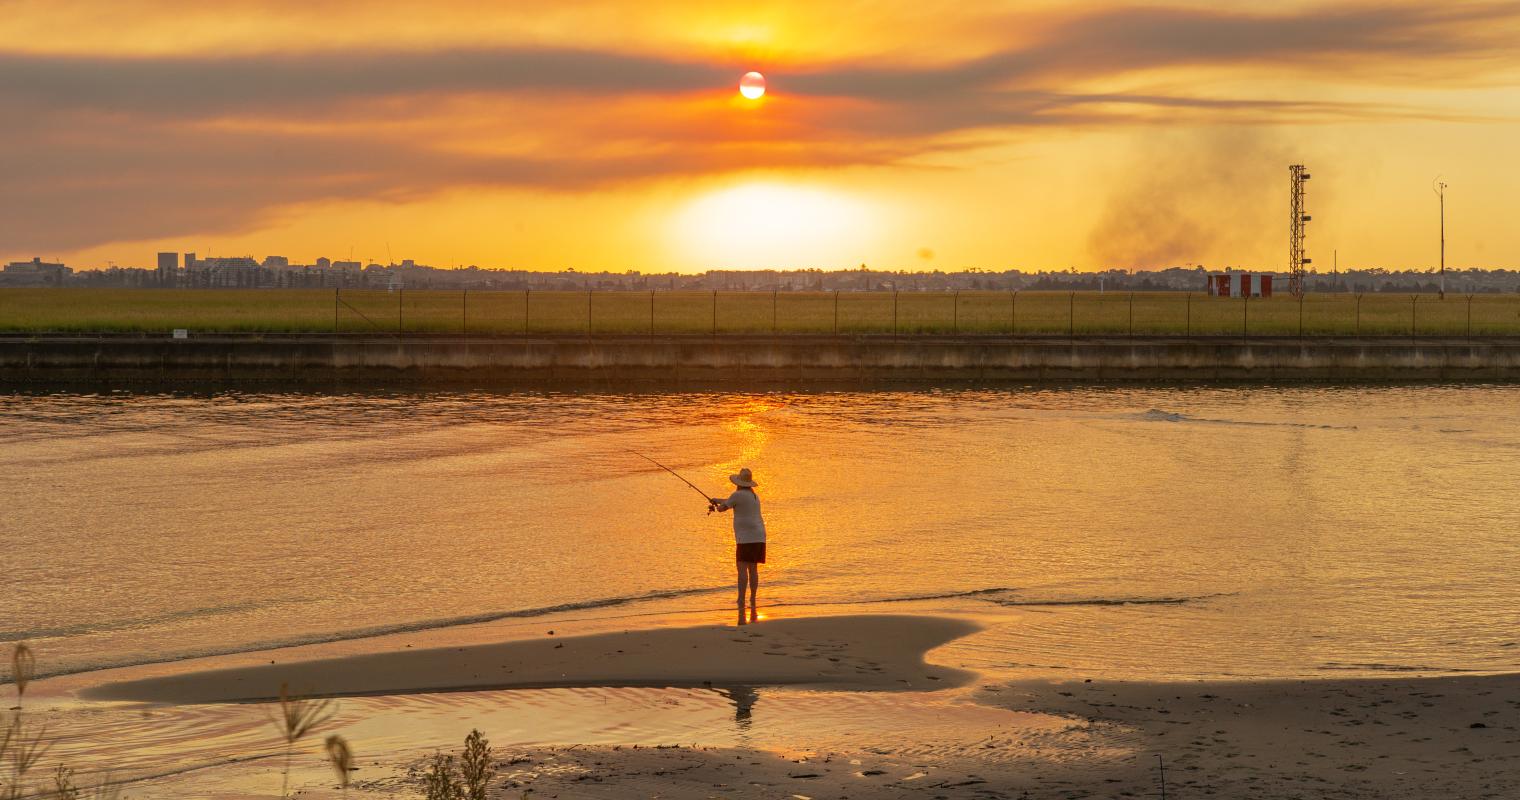 image of a person fishing at sunset